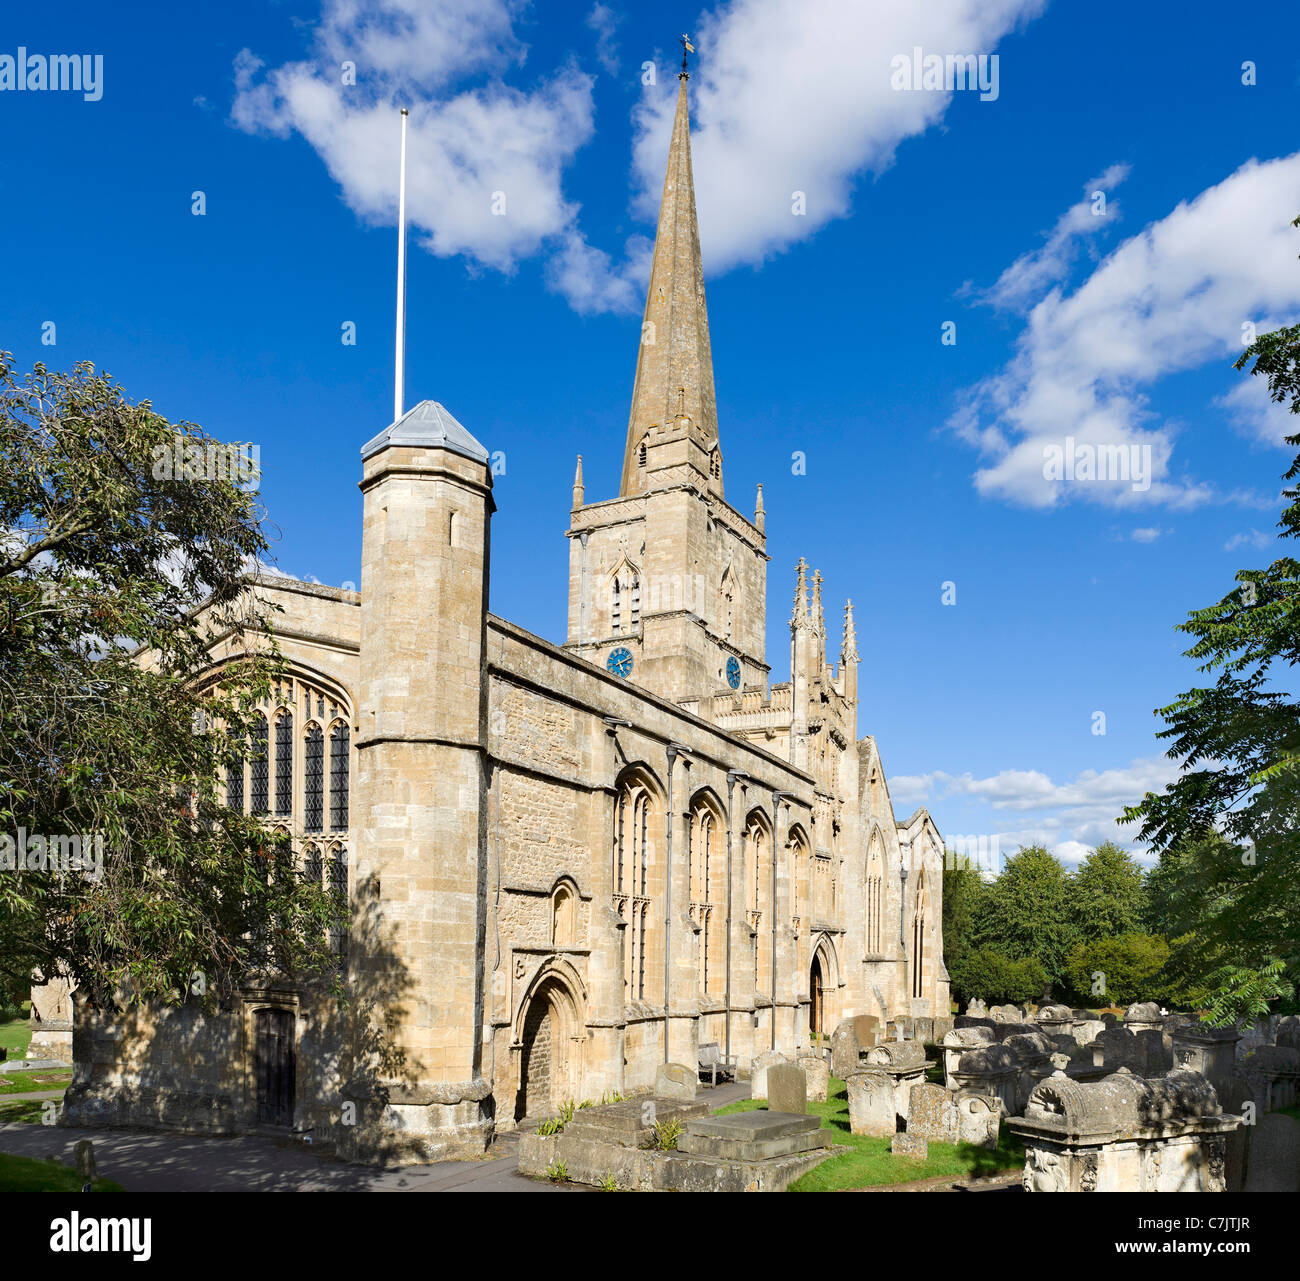 St John the Baptist parish church in the Cotswold town of Burford, Oxfordshire, England, UK Stock Photo